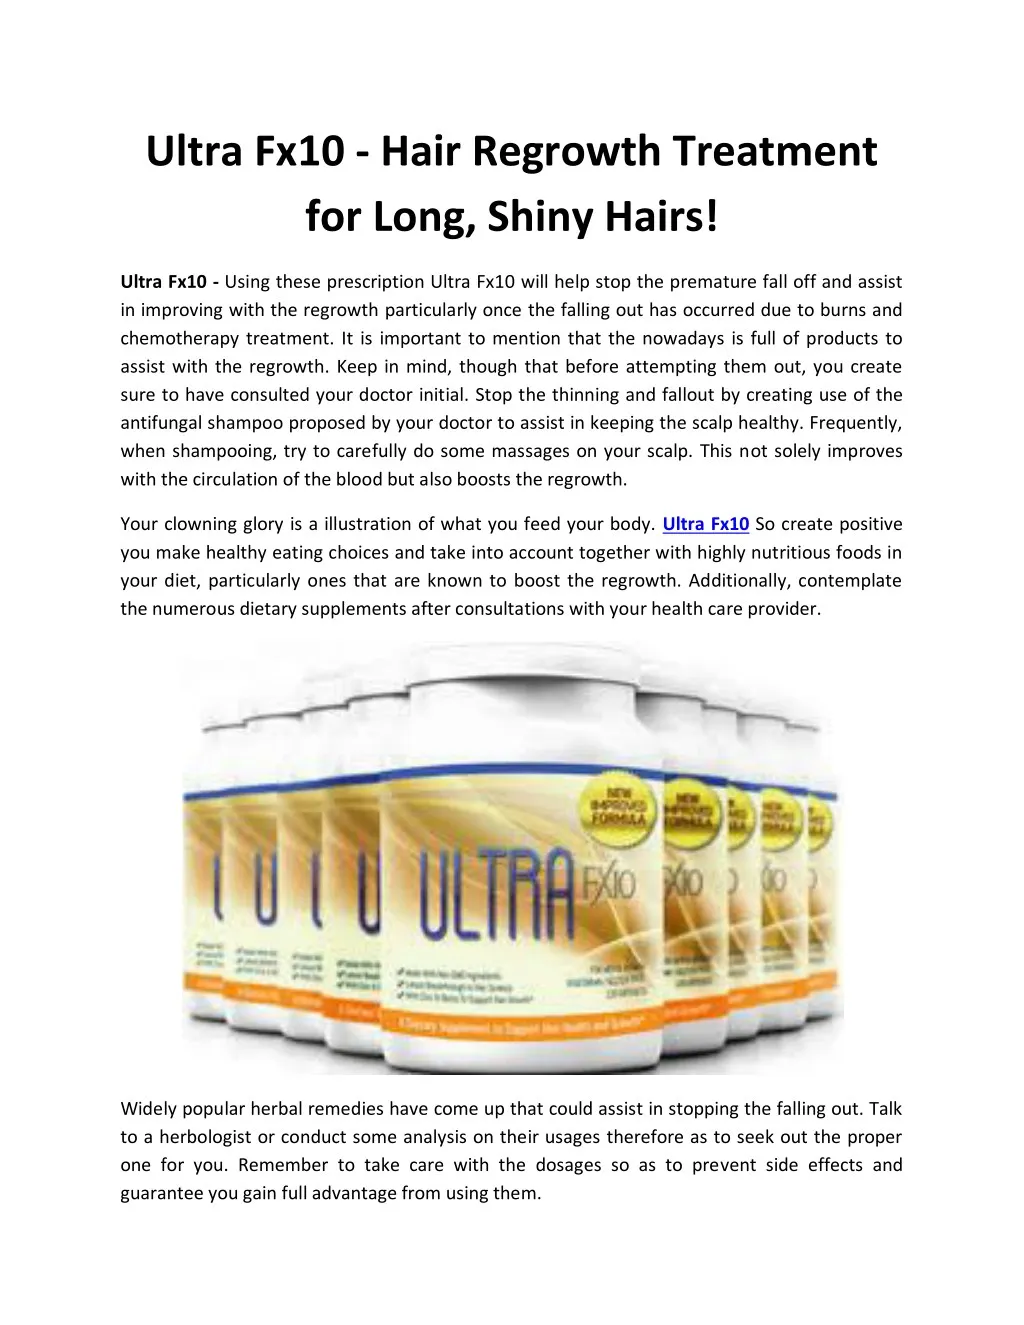 ultra fx10 hair regrowth treatment for long shiny